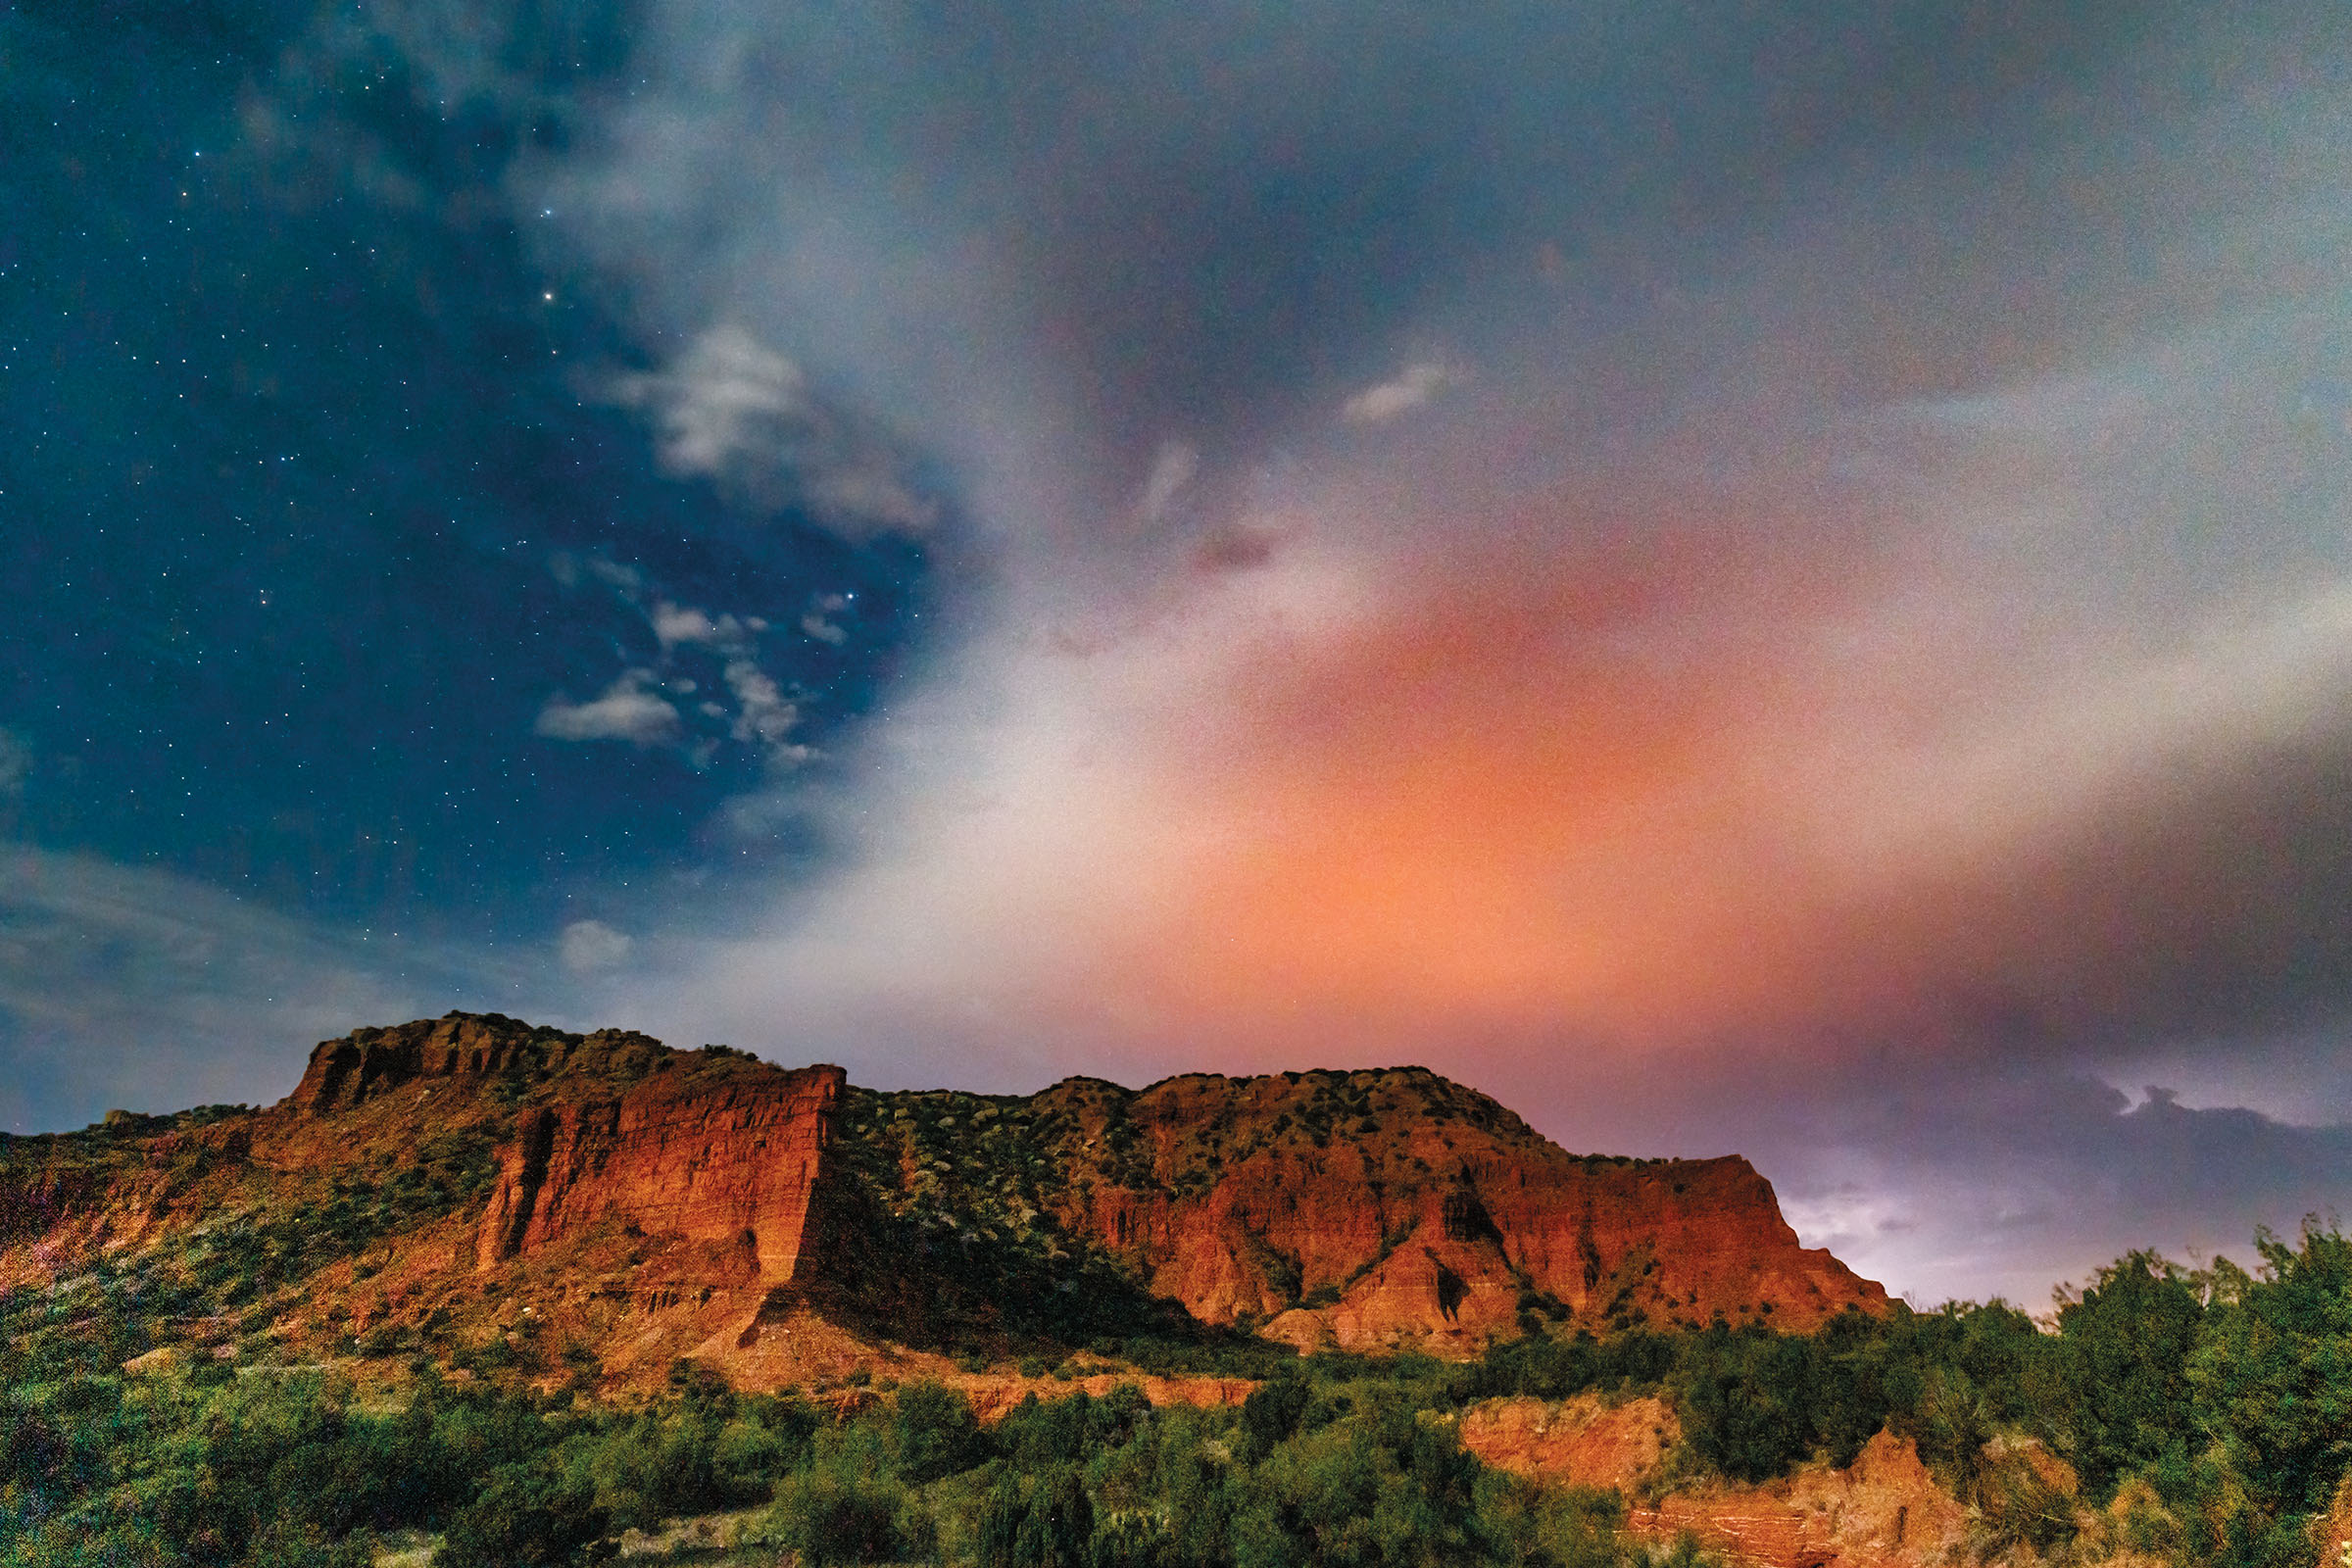 A large red rock outcropping under a large cloud with a pink tint on a dark sky